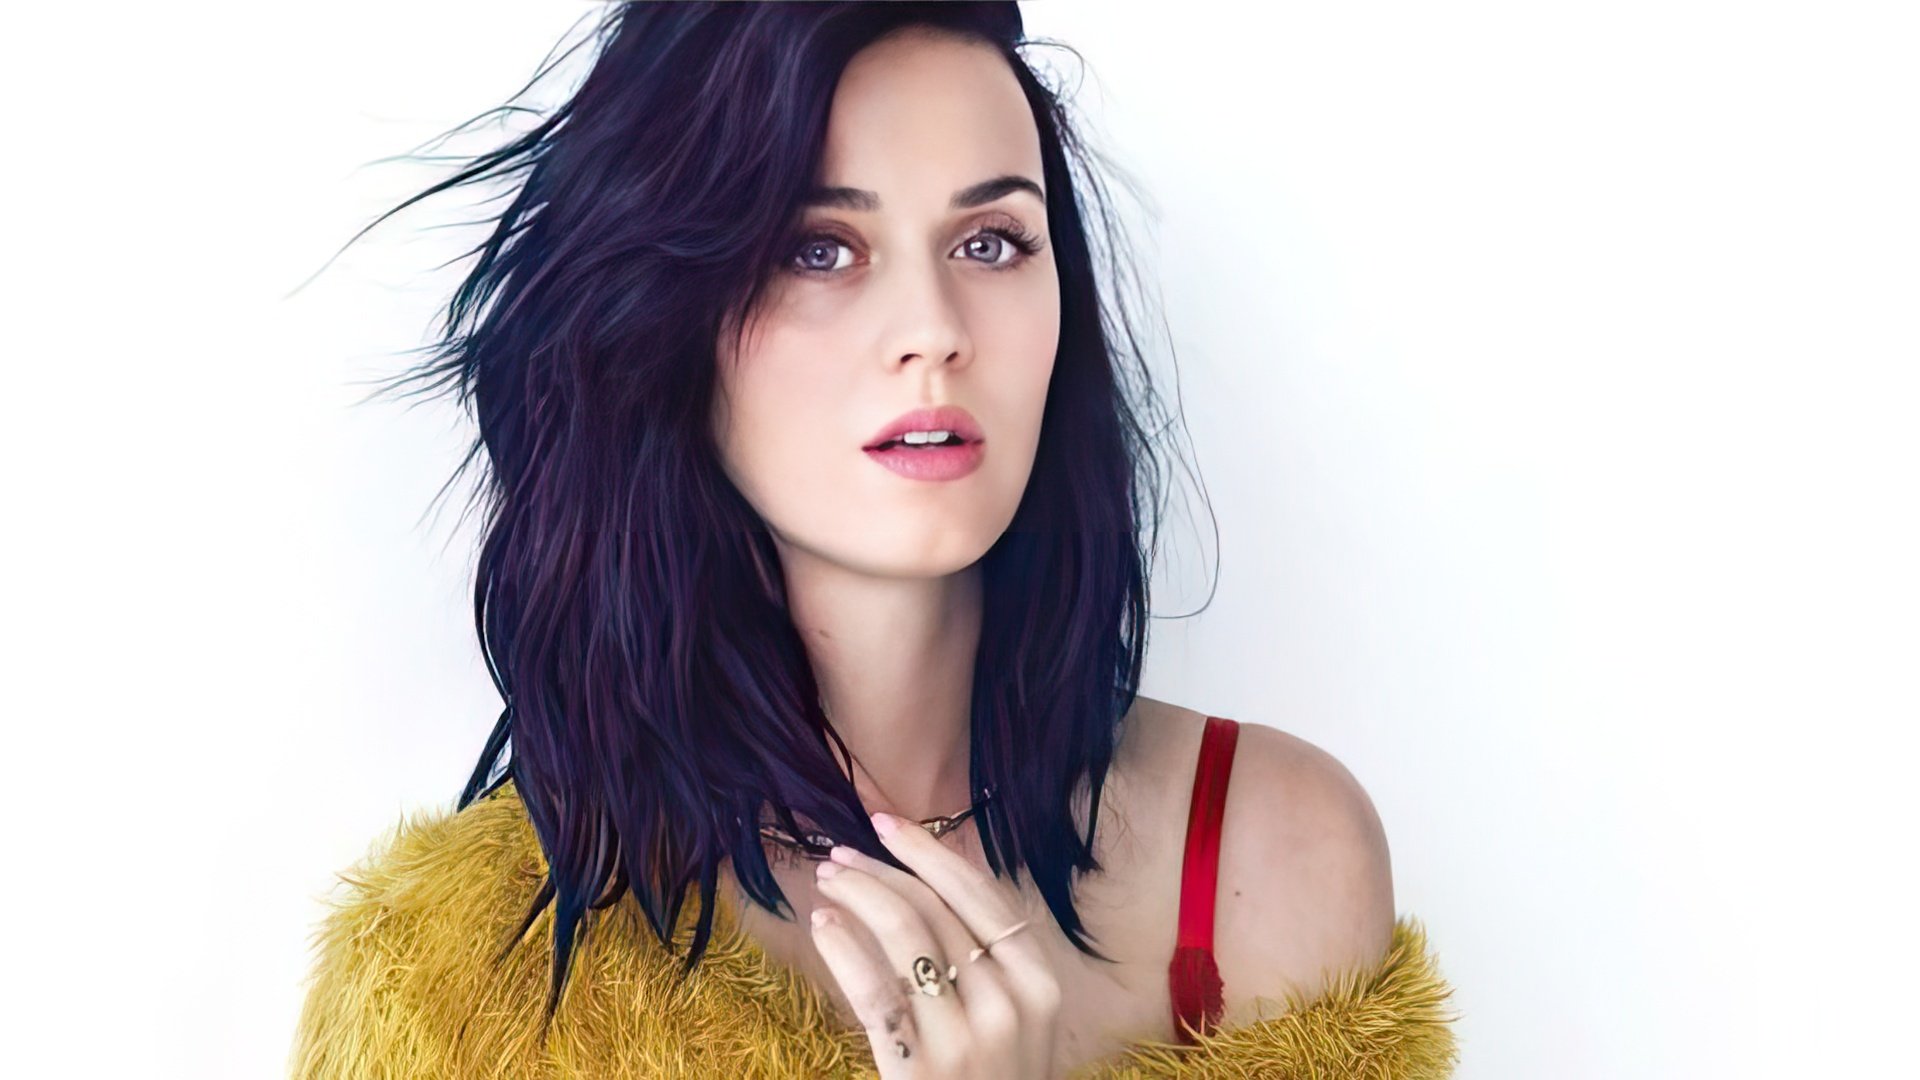 Katy Perry's songs are known and loved all over the world